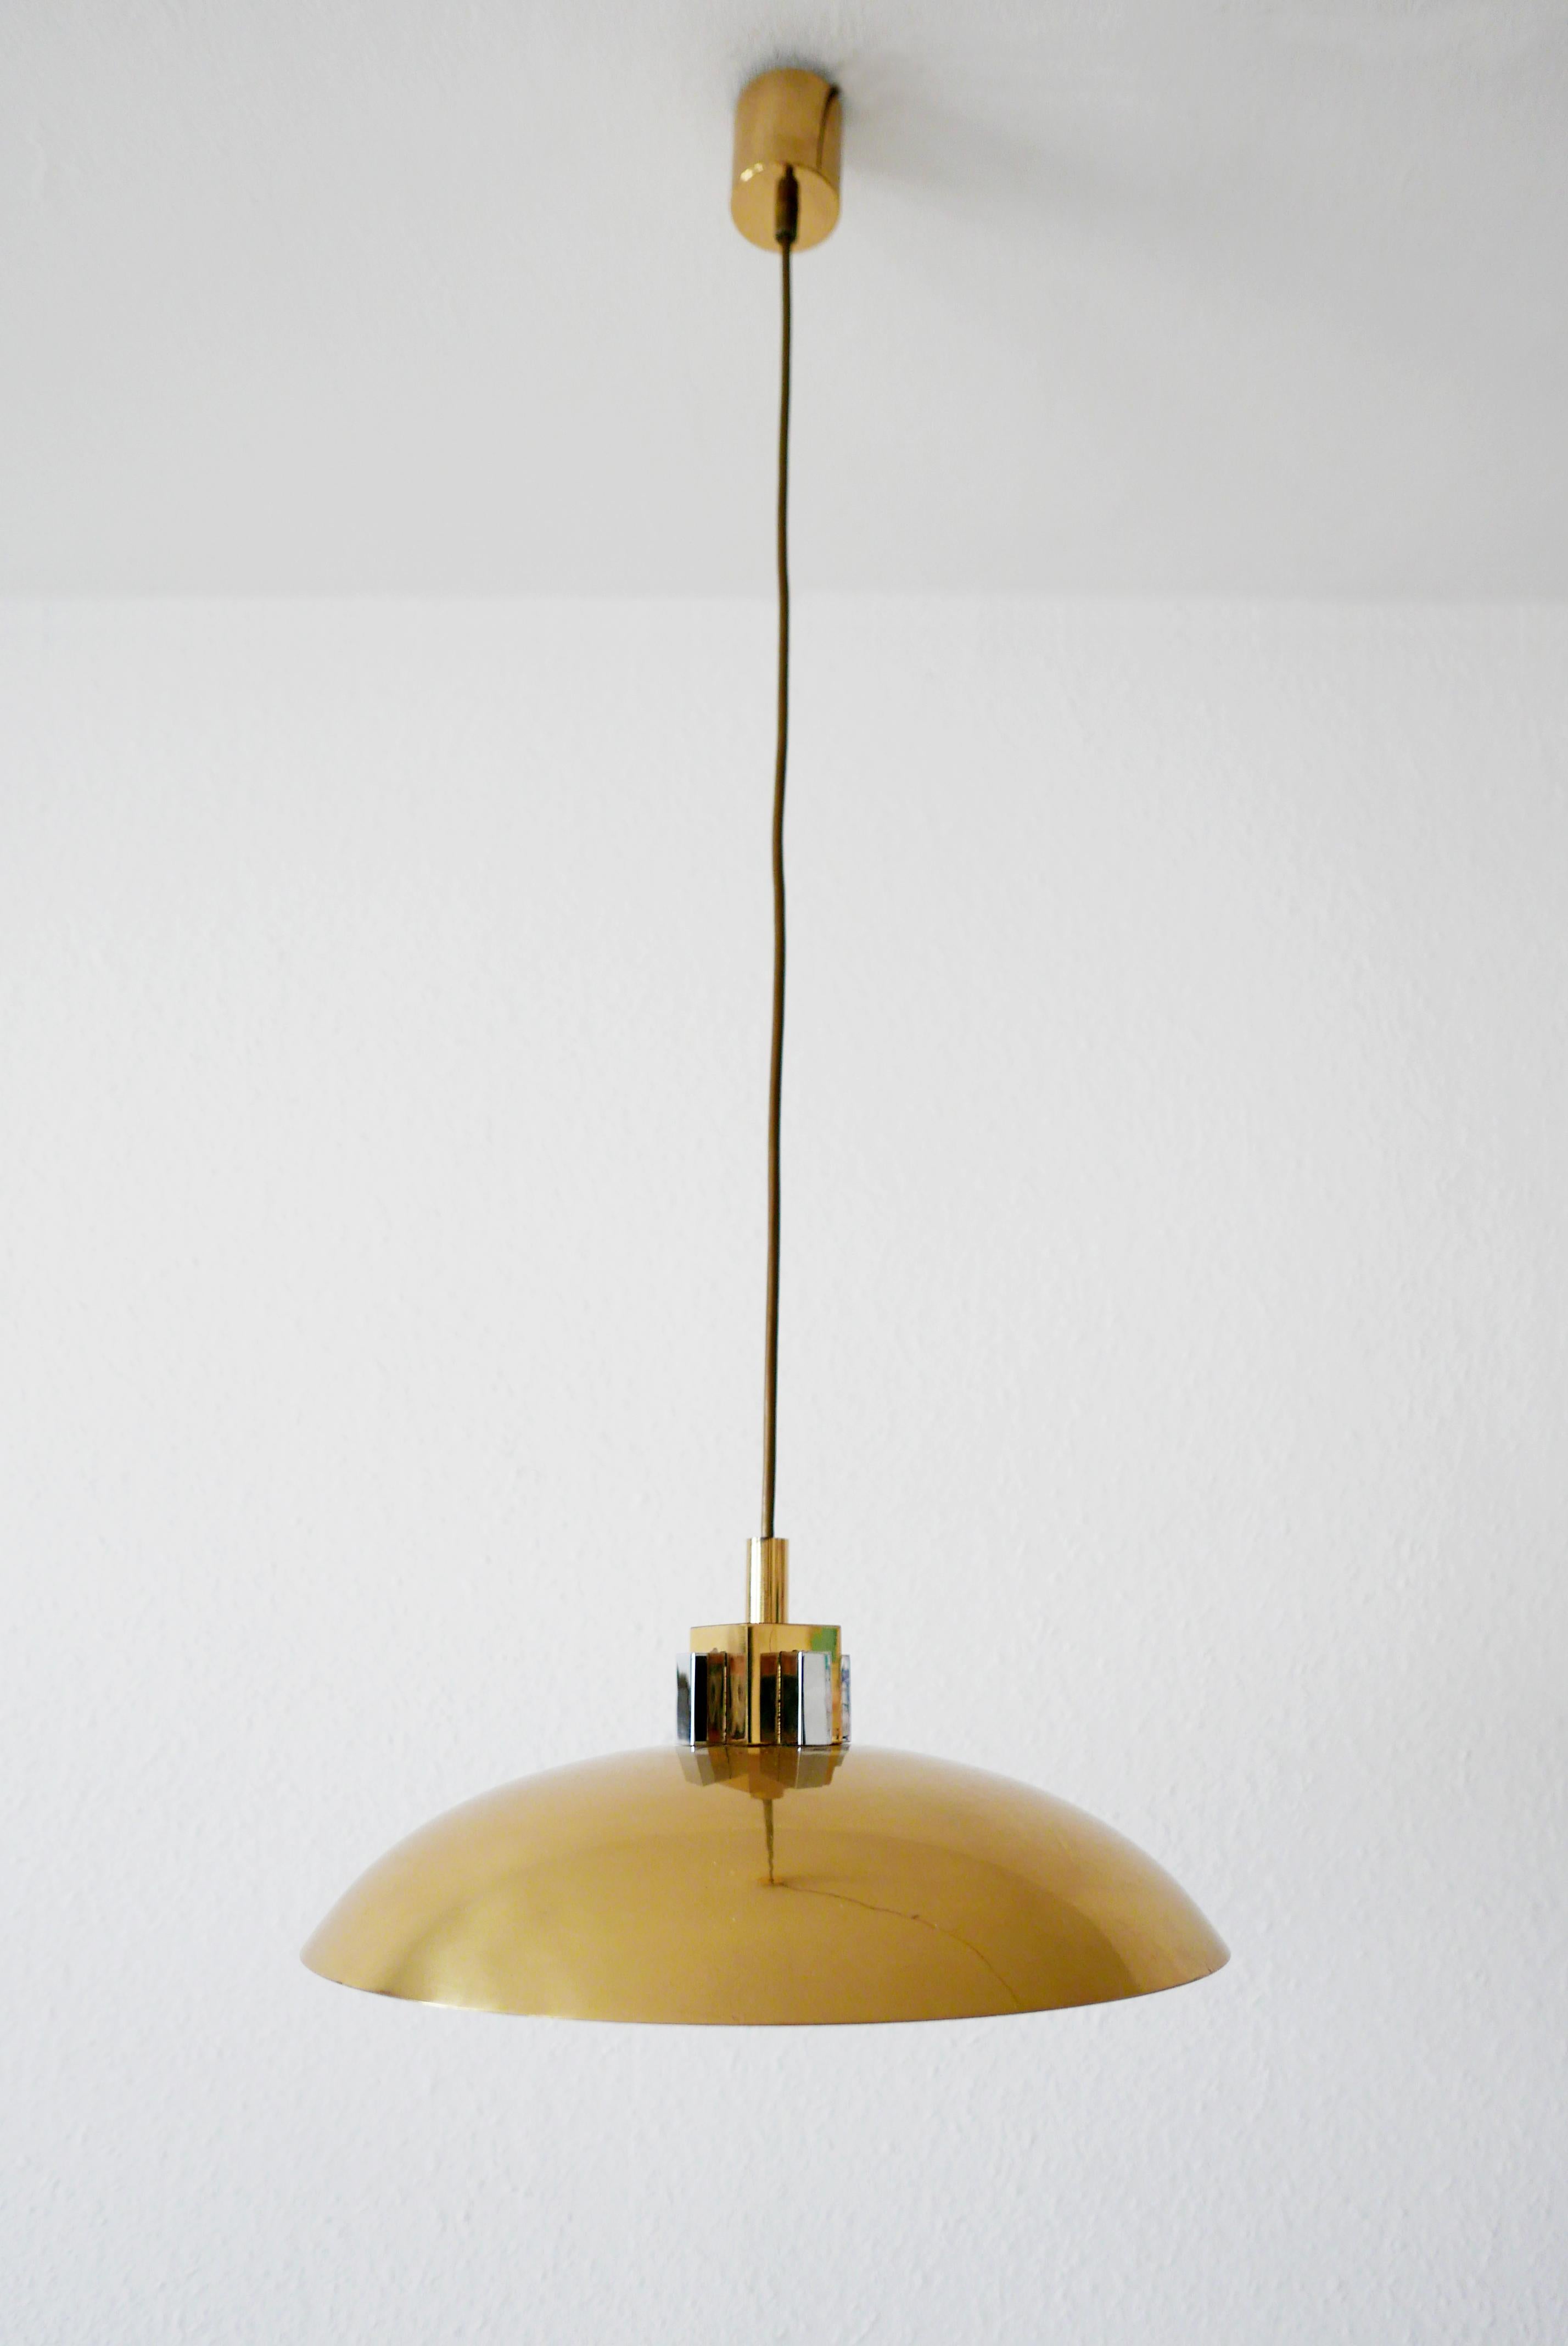 Polished Mid-Century Modern Brass Pendant Lamp by Art-Line, 1980s, Germany